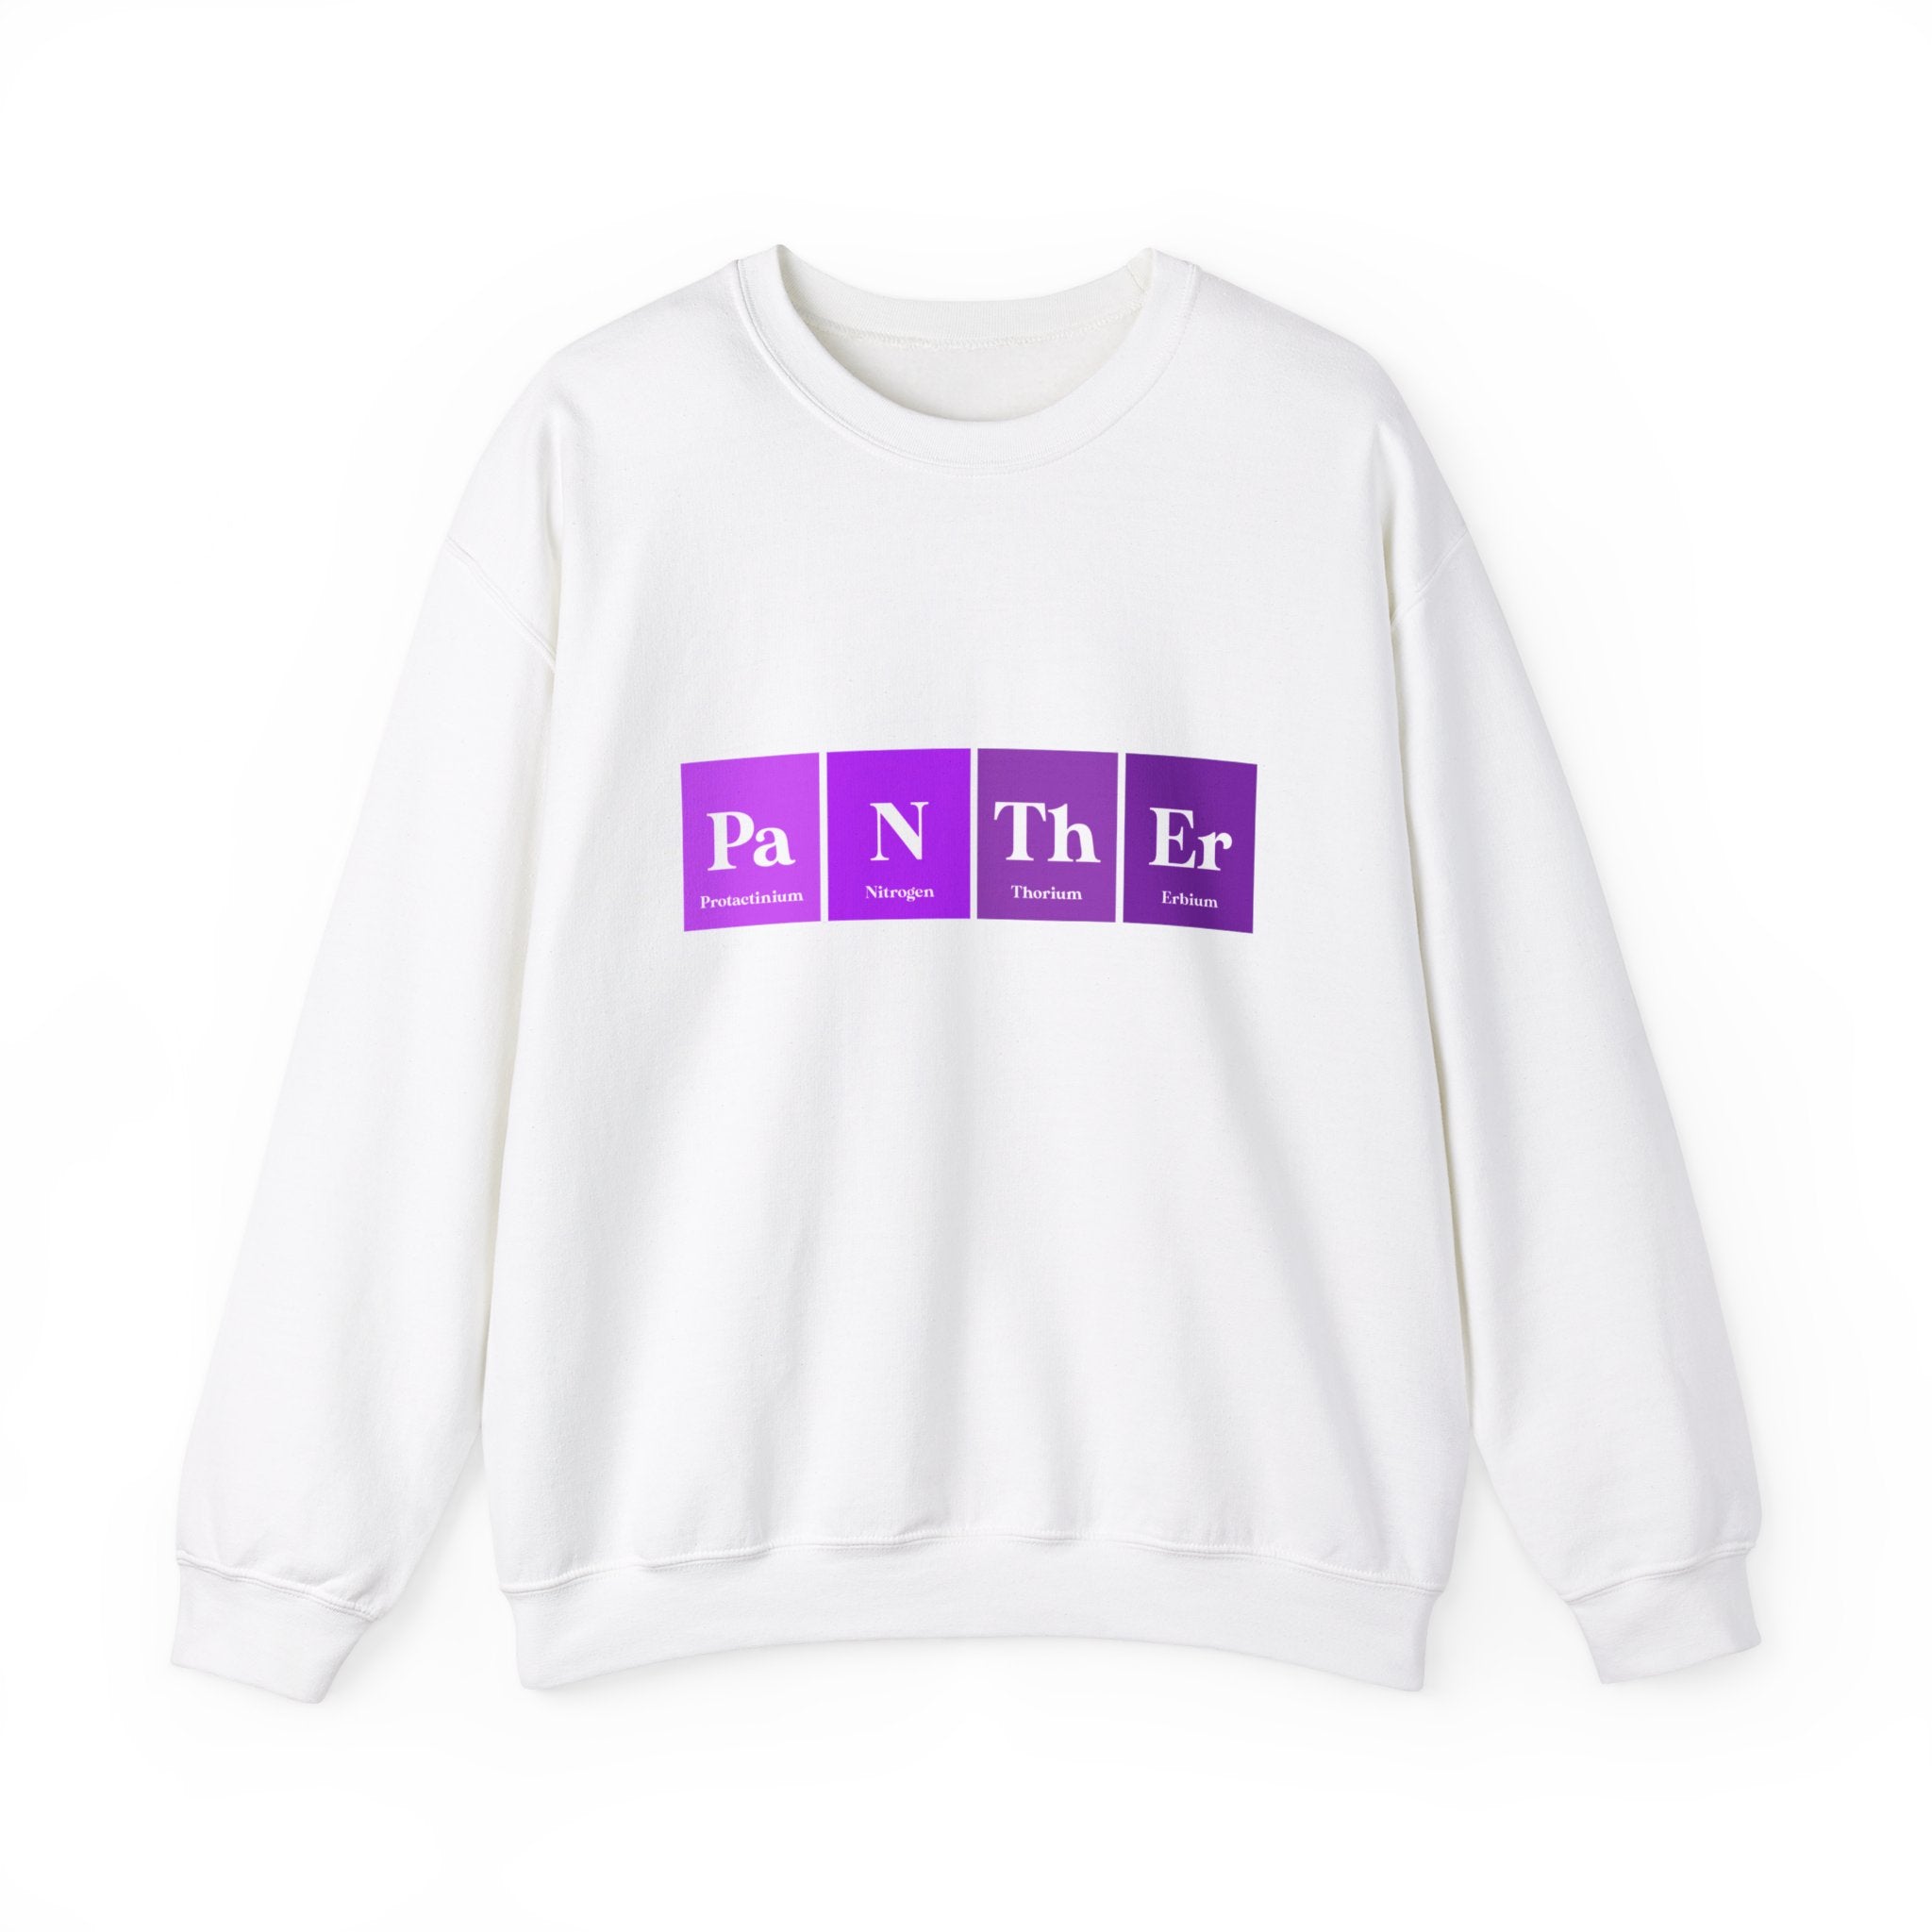 White sweatshirt with an ultra-soft Pa-N-Th-Er - Sweatshirt design featuring four purple periodic table-style squares spelling "Panther" with corresponding scientific notations: Procrastination, Nitrogen, Thorium, and Erbium. Perfect for staying cozy in colder months.